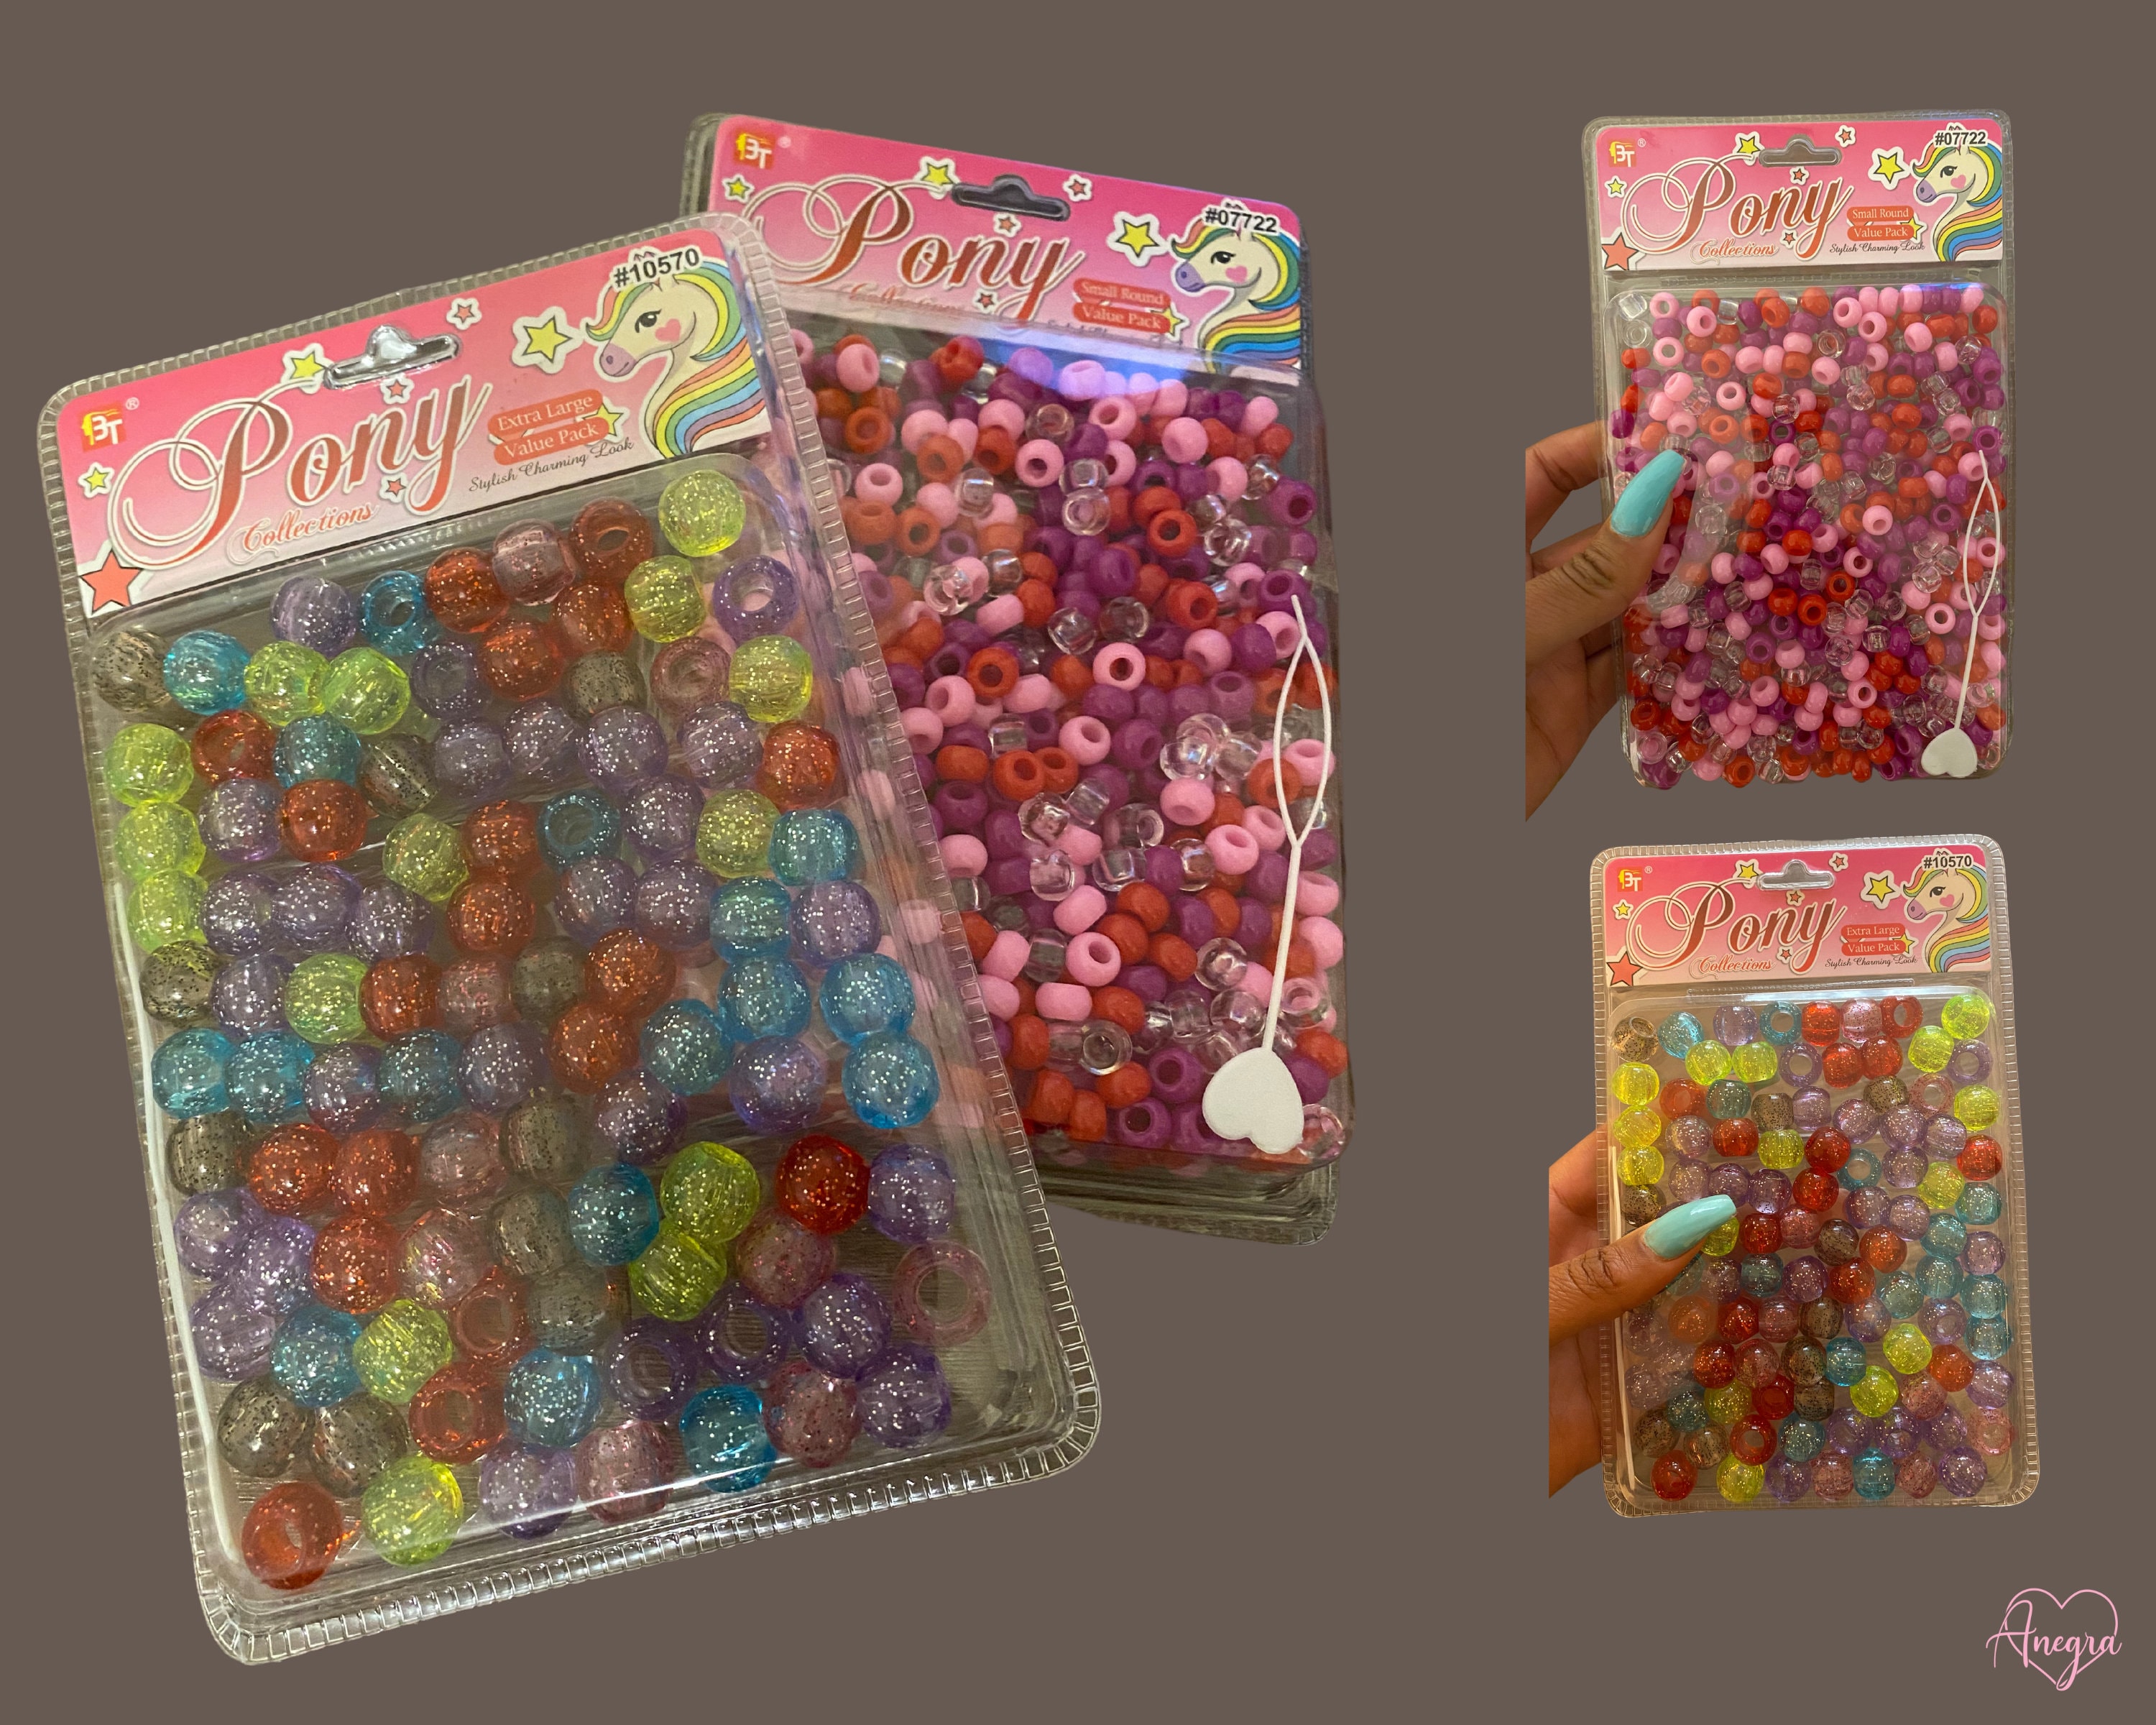 100 Carnival Pony Beads Mix 6mmx9mm Pink, Green, Yellow, Orange, Pearl,  Clear, Pony Beads. Hair Dummy Clip Jewellery Loom Bands Crafts